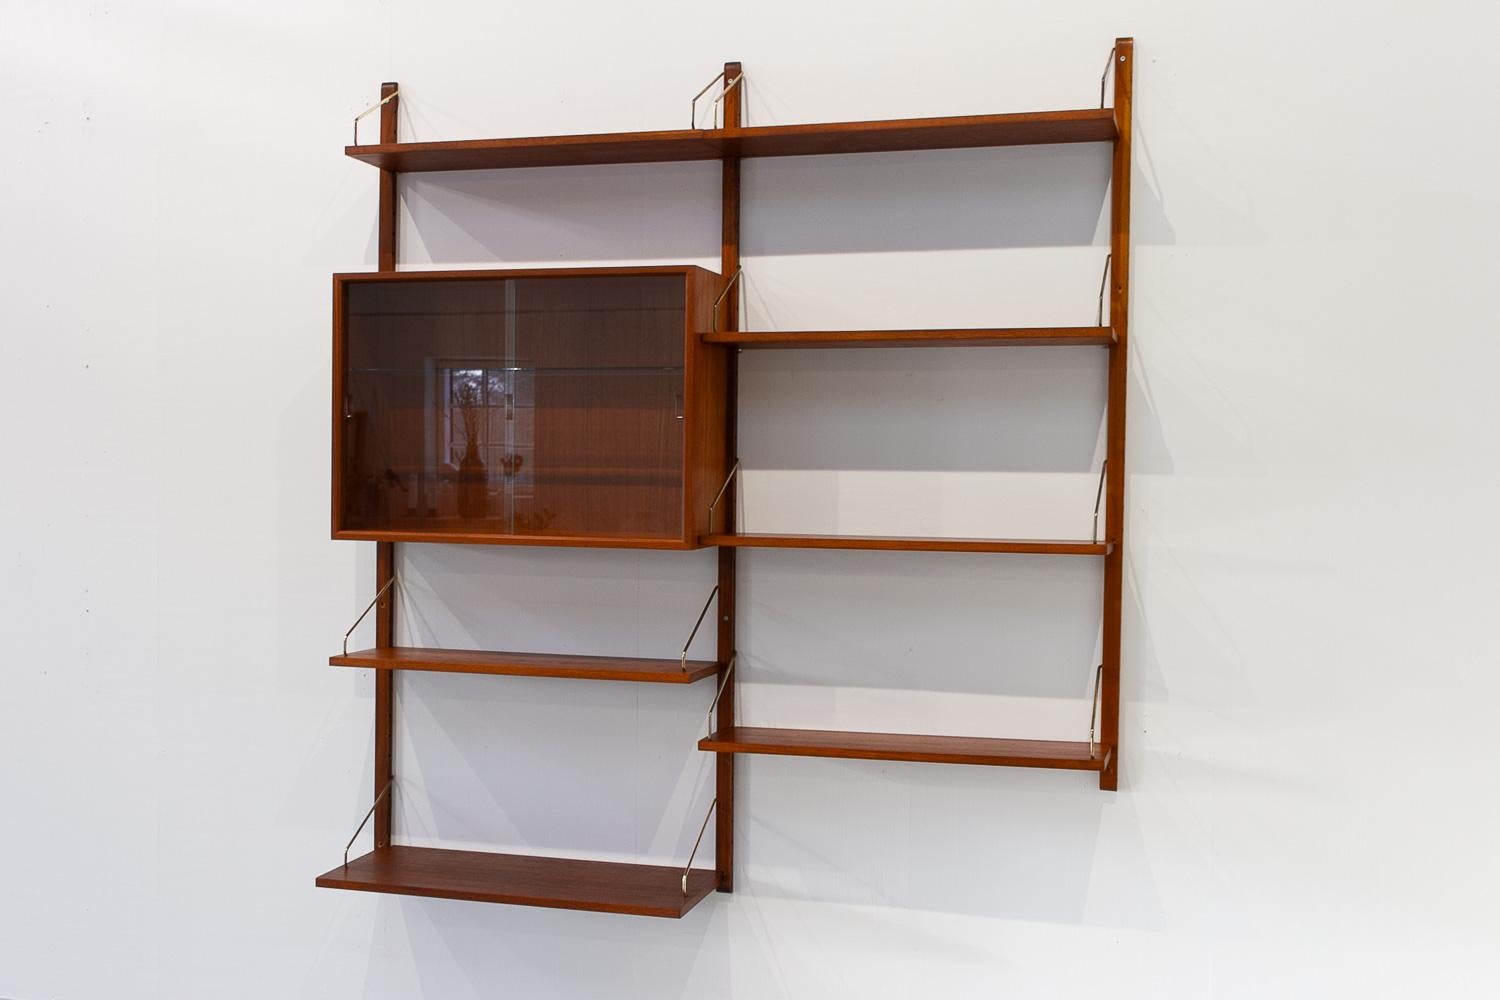 Danish Modern 2-Bay Modular Teak Wall Unit by Poul Cadovius for Cado, 1950s.

Mid-Century Modern 2 bay shelving system model Royal. This is an original vintage floating bookcase designed in 1948 by Danish architect Poul Cadovius. 
Cadovius had the